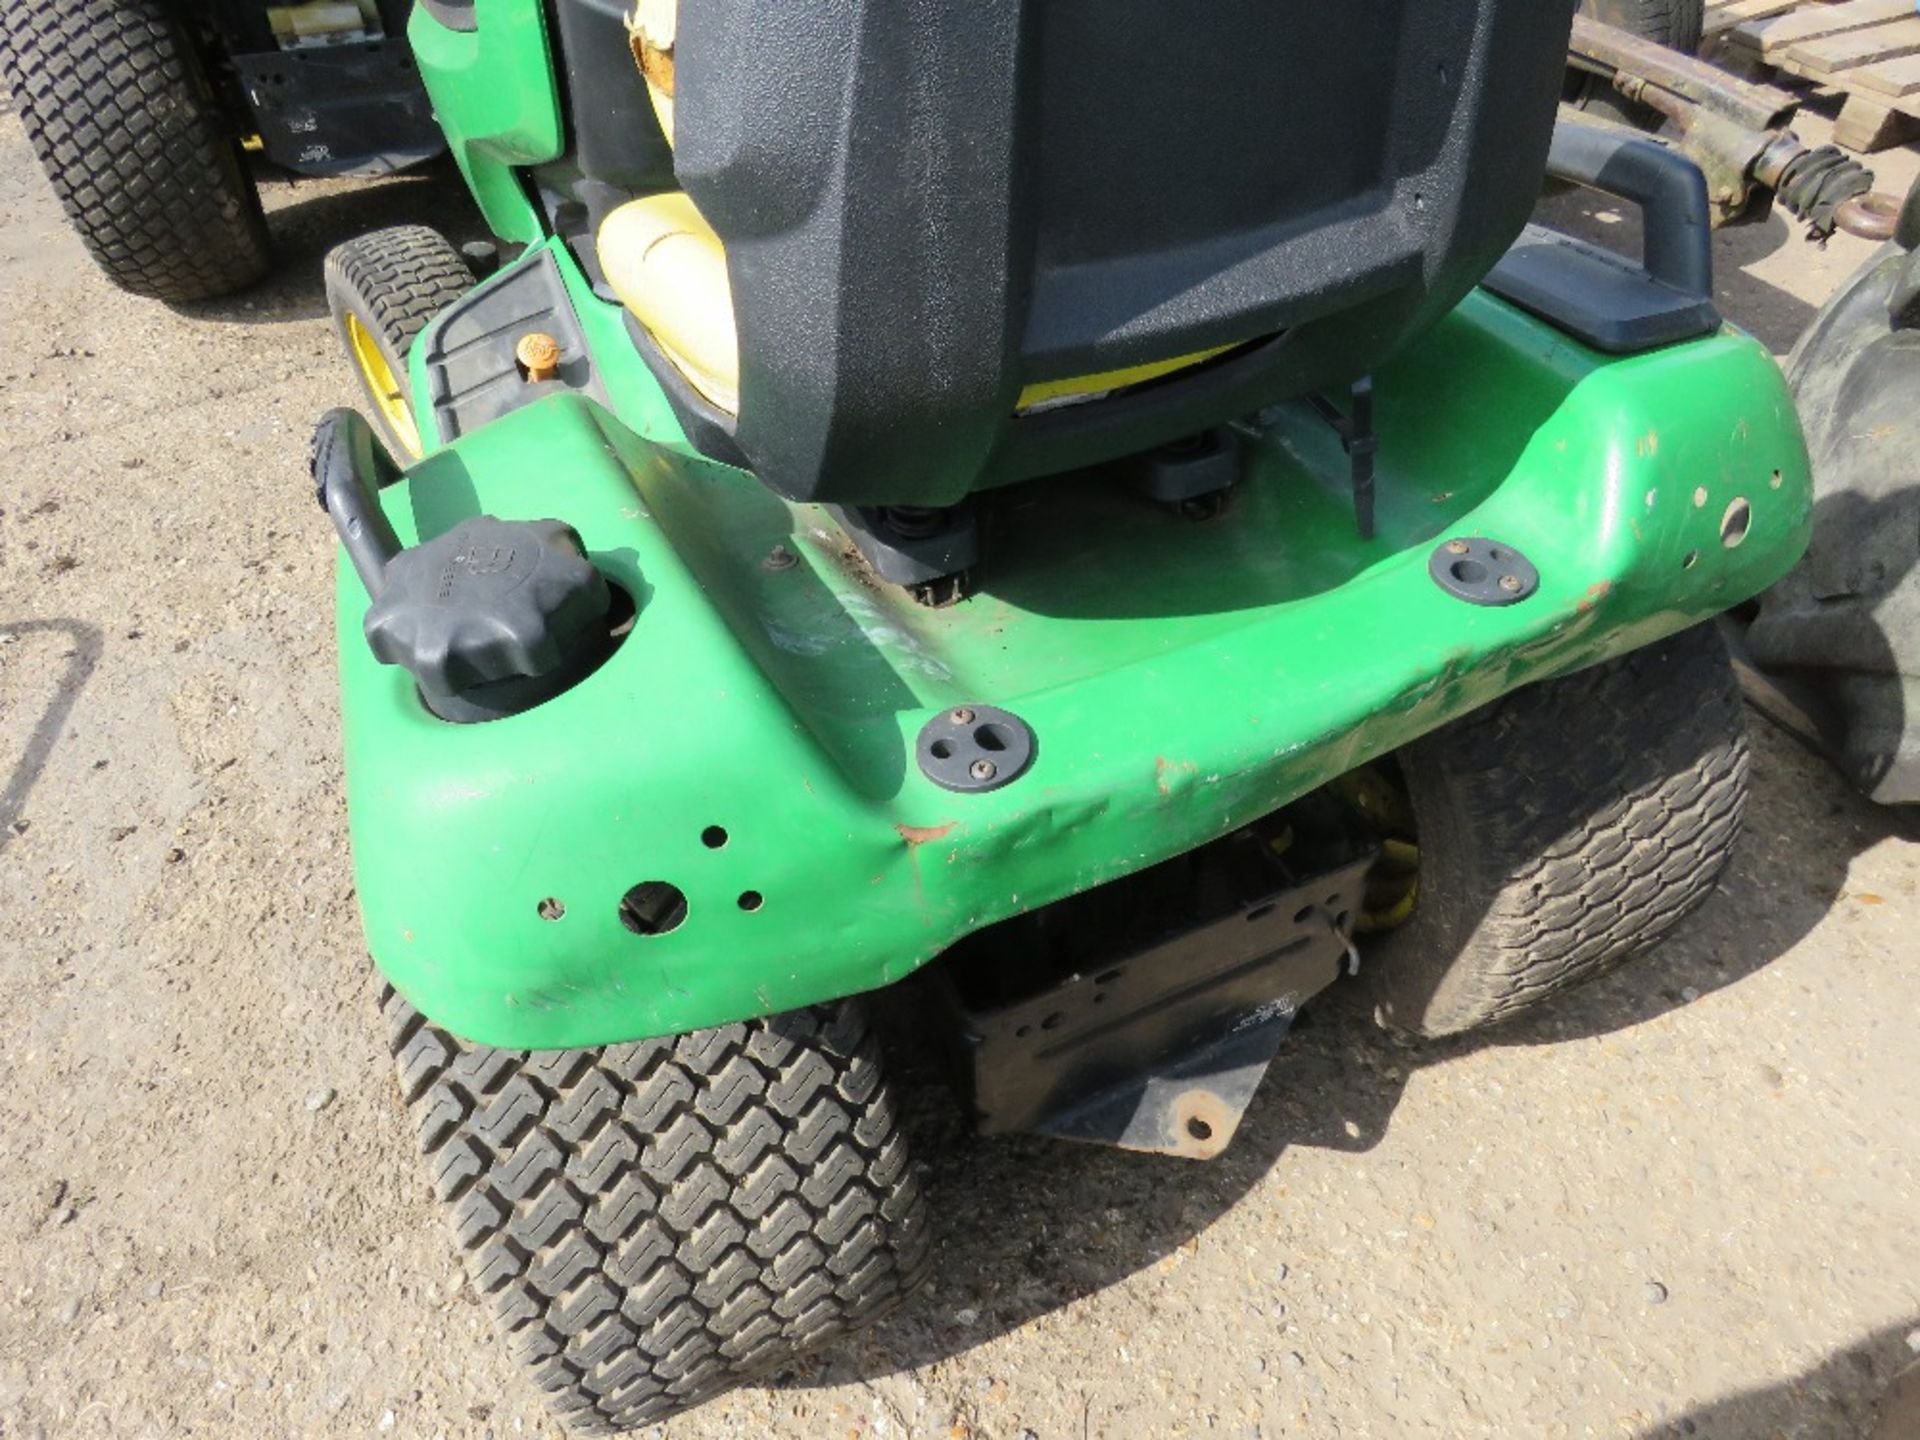 JOHN DEERE X540 PROFESSIONAL RIDE ON PETROL MOWER. PREVIOUS COUNCIL USEAGE. STRAIGHT FROM STORAGE, - Image 4 of 5